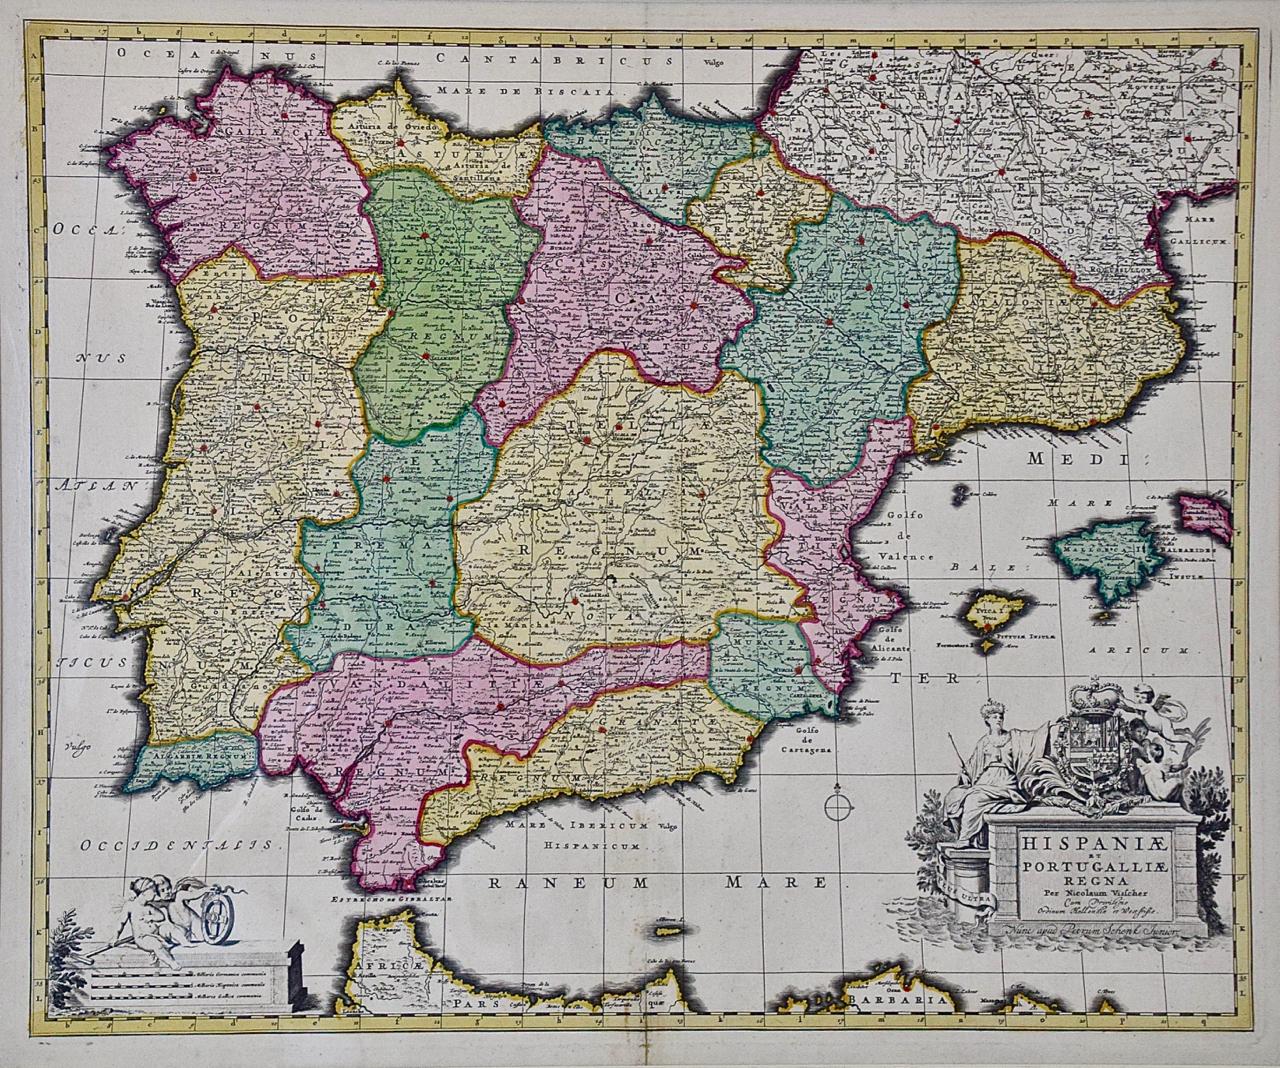 Nicolaus Visscher Landscape Print - Spain and Portugal: A Hand-colored 17th/18th Century Map by Visscher 